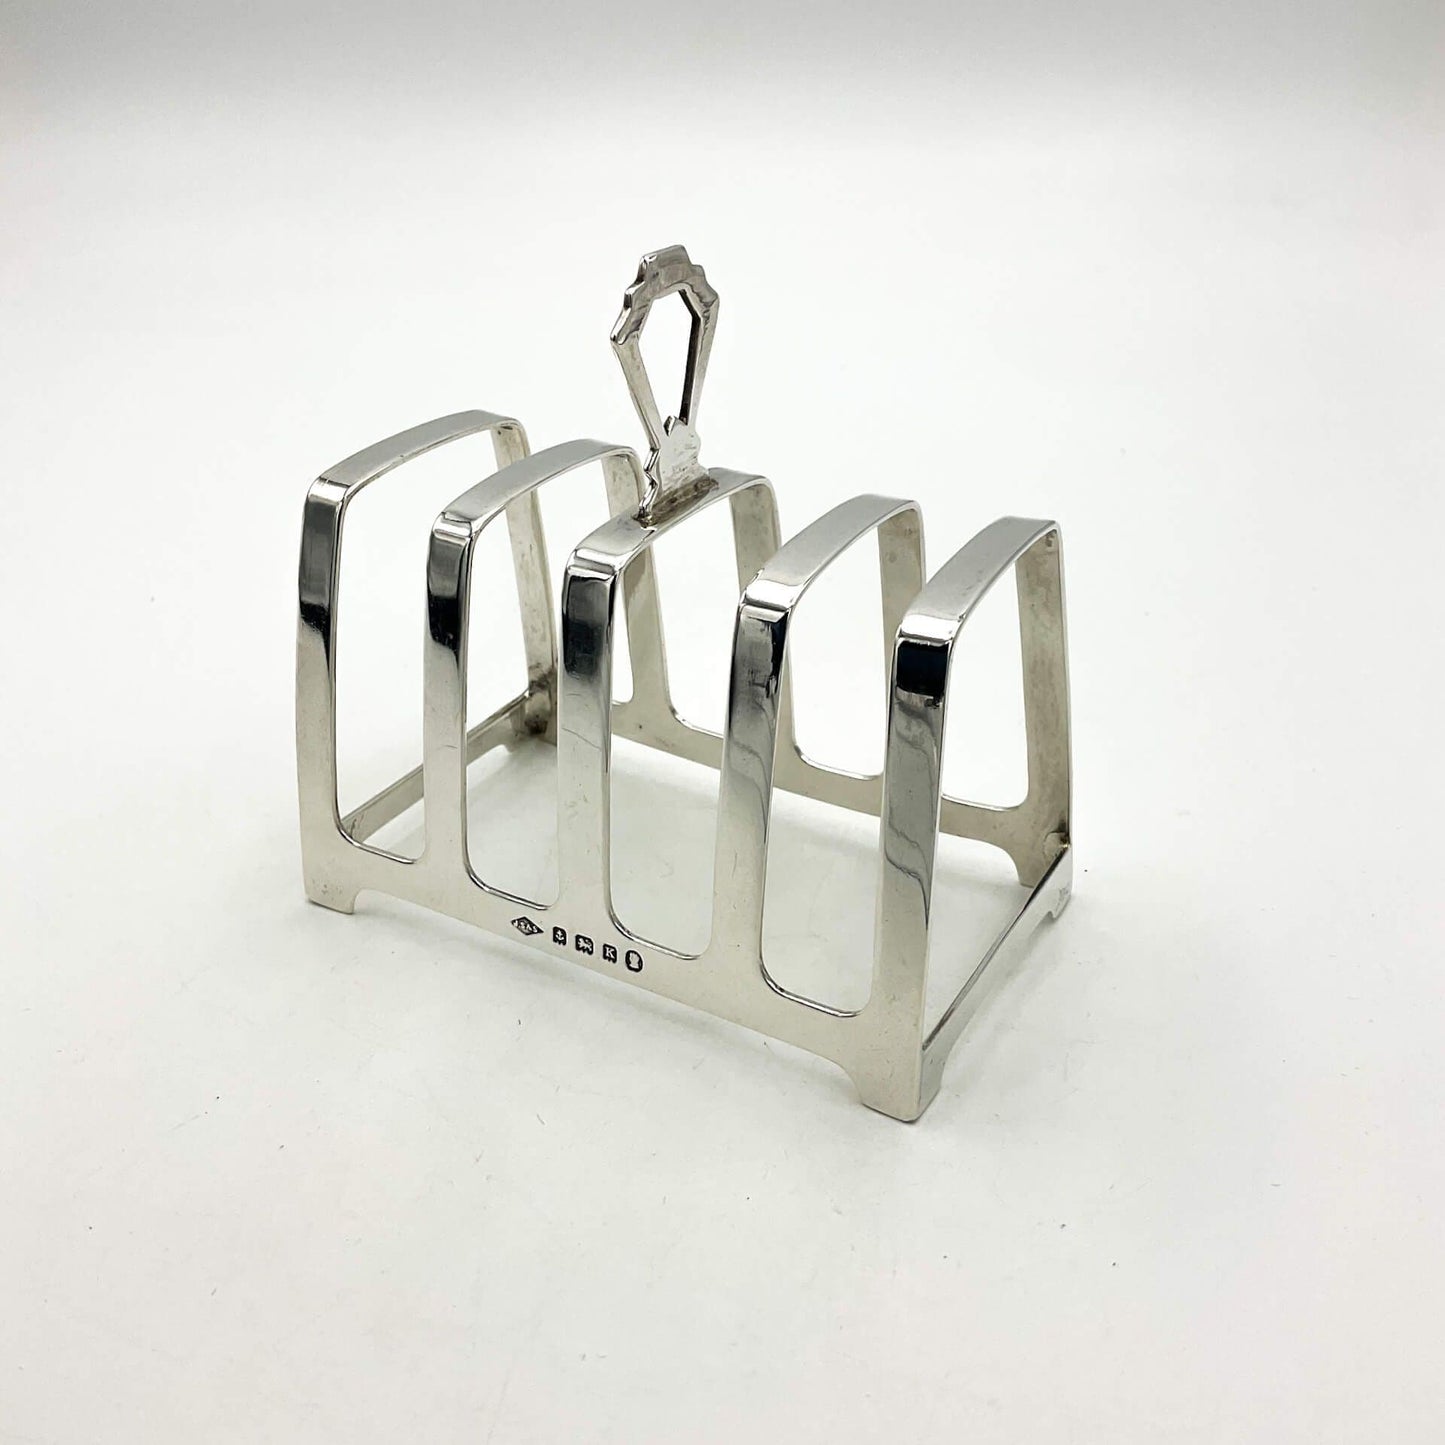 Art deco style silver toast rack on a white background